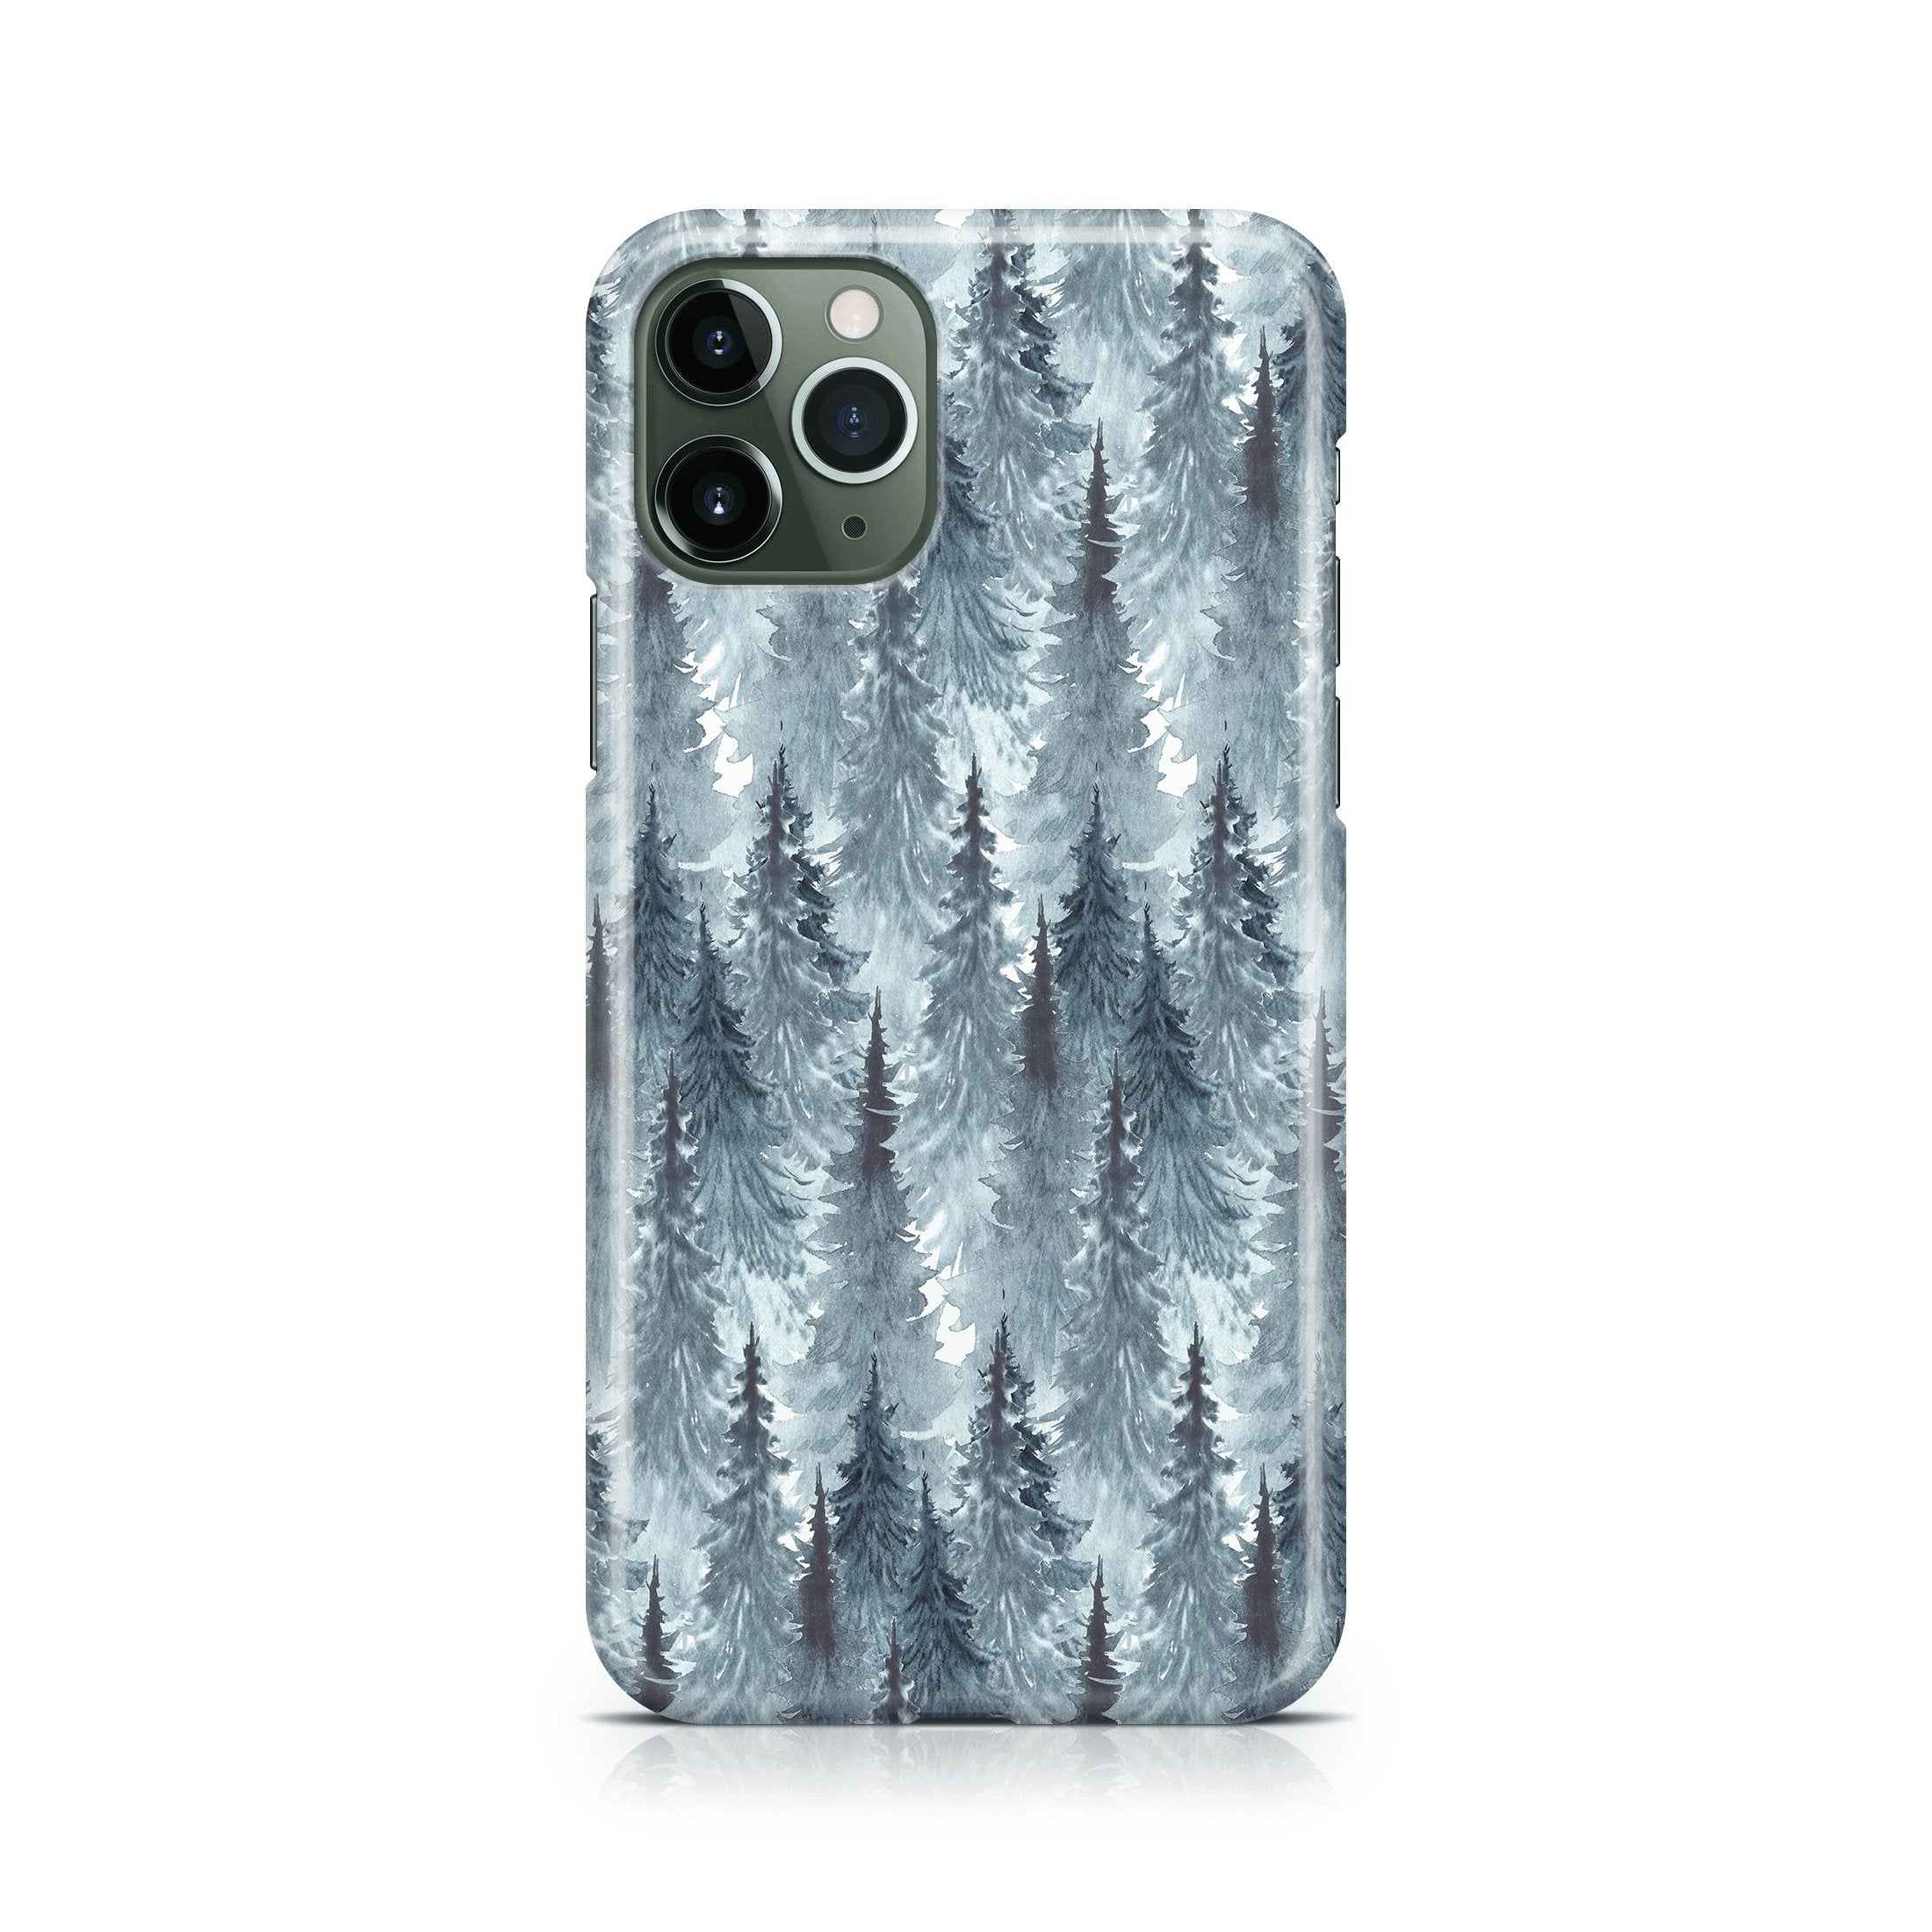 Winter Forest II - iPhone phone case designs by CaseSwagger